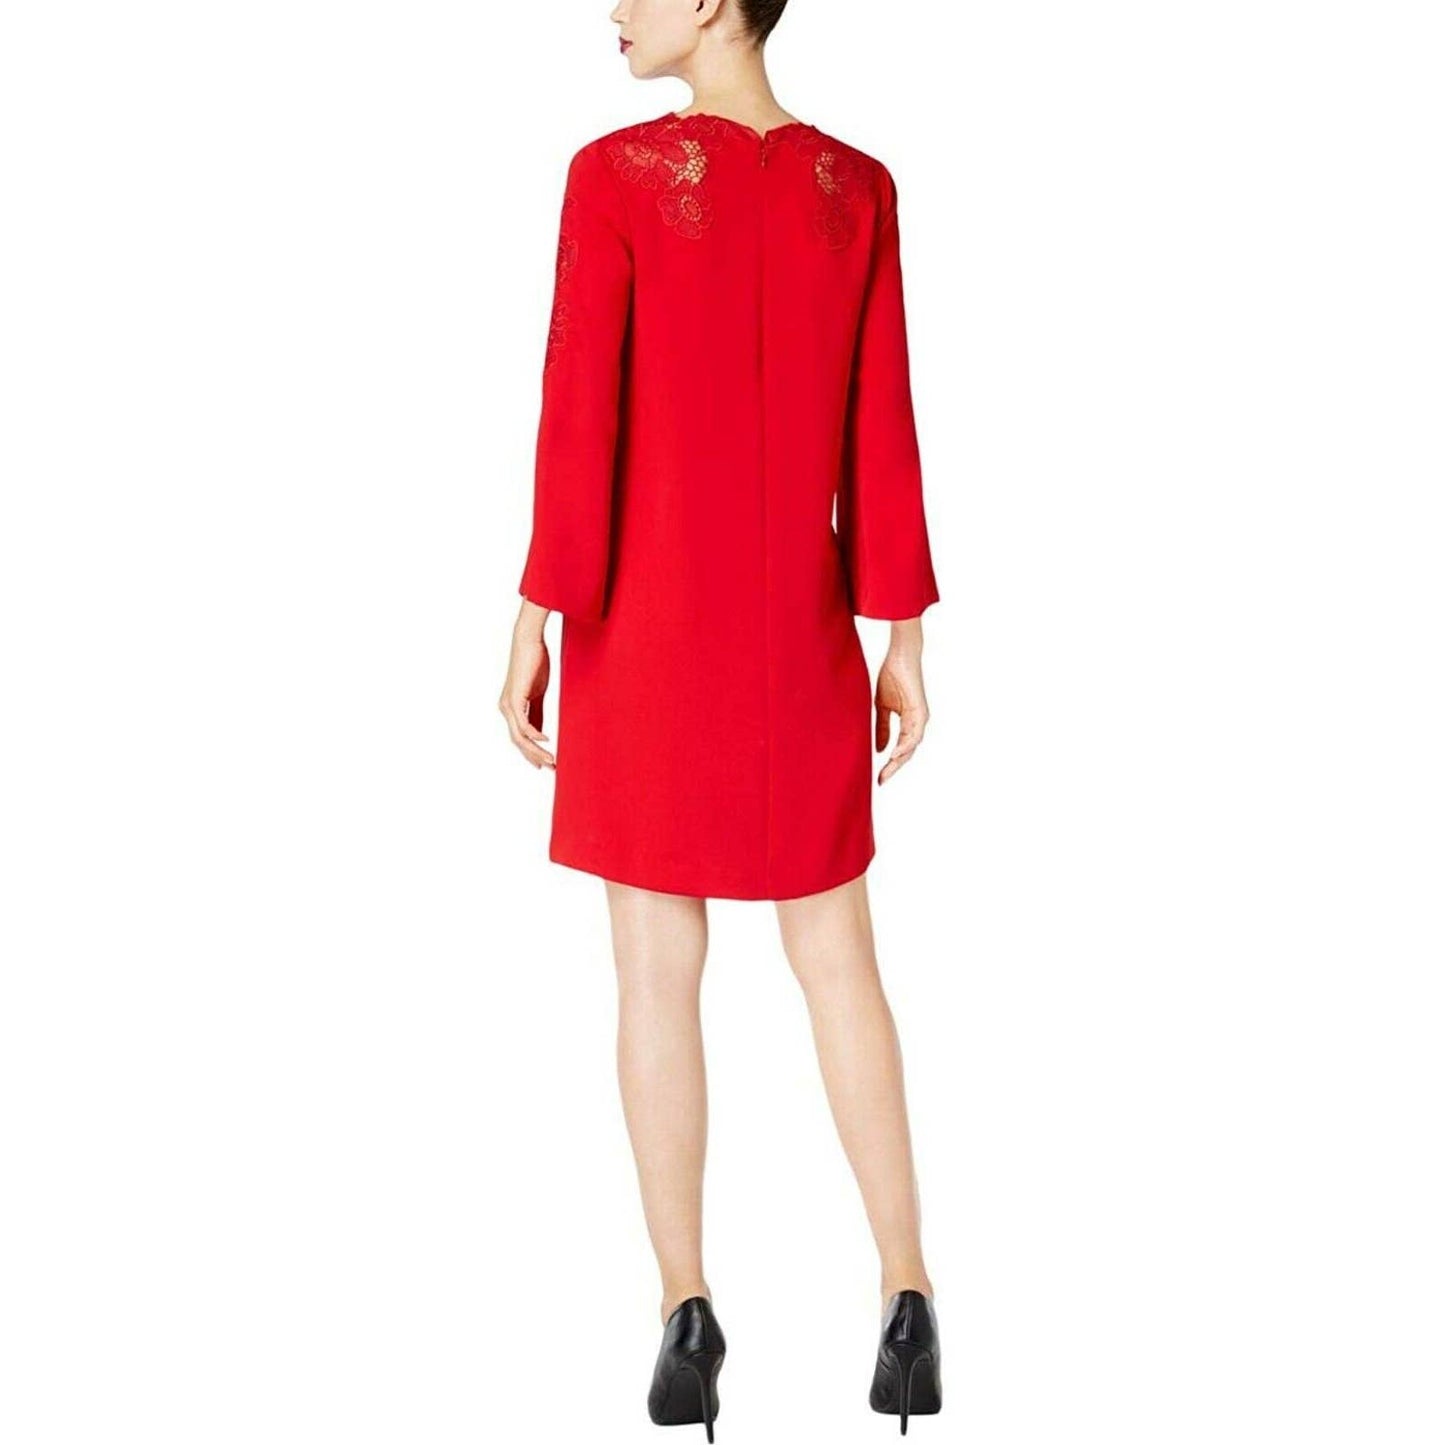 ALFANI LADIES BELL SLEEVE COCKTAIL SHIFT DRESS, LACE TRIMMED, BANNER RED, NWT